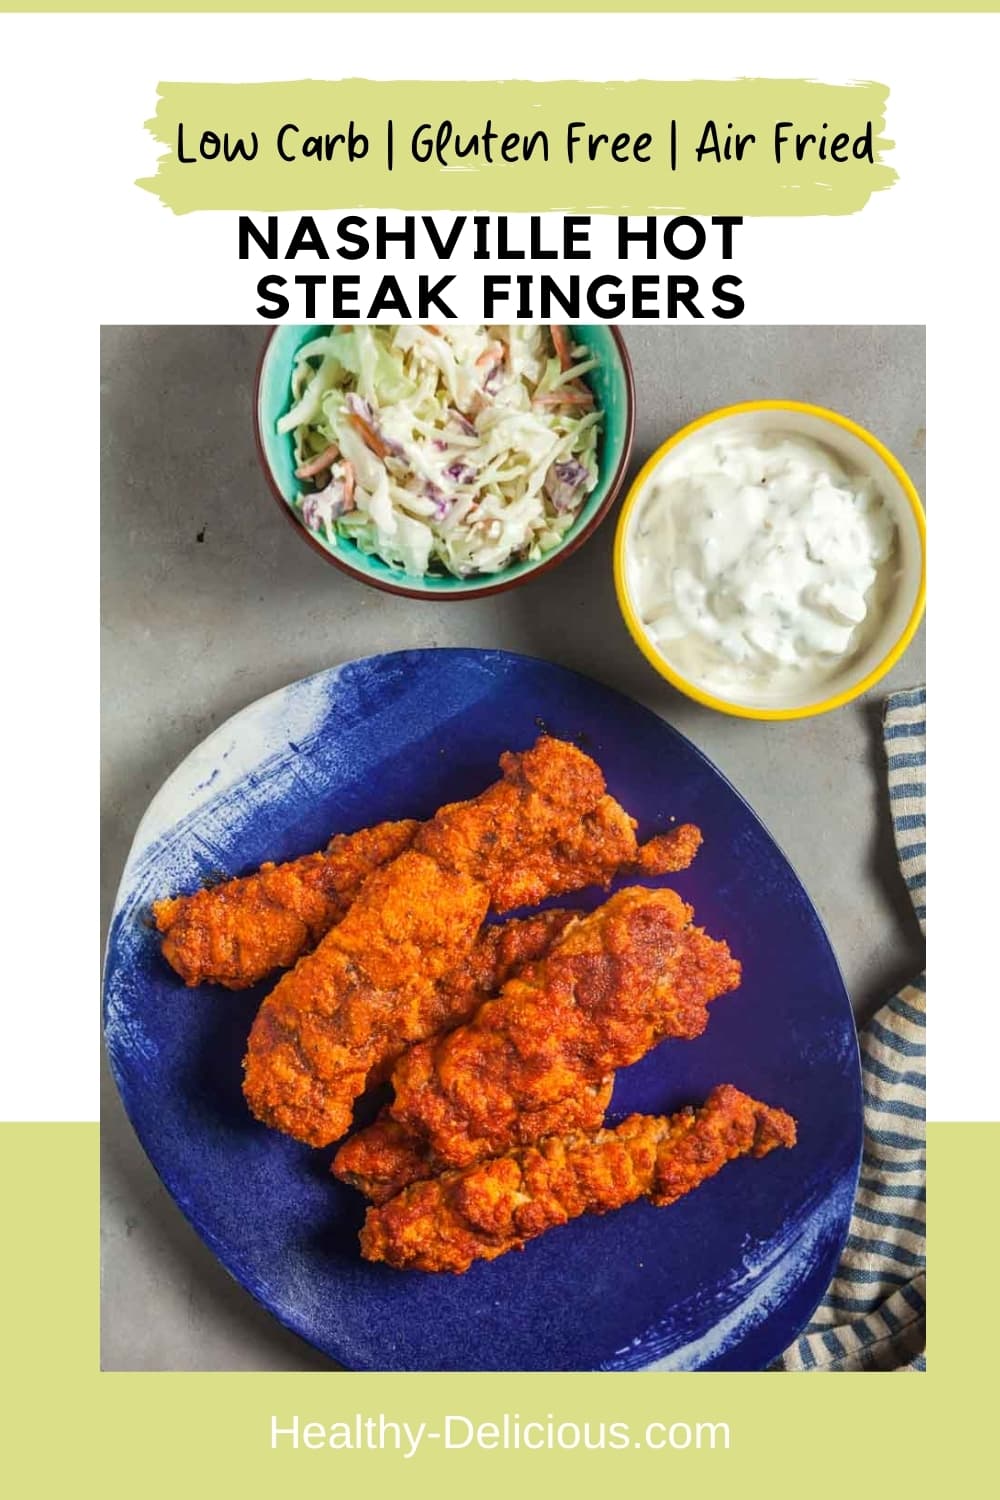 You've probably heard of chicken fingers, but have you ever heard of steak fingers? In my take on this popular Idaho recipe, tender pieces of steak are coated in spicy gluten-free breading and fried until they're perfectly crisp. Brush on some more Nashville hot sauce, then dip them in creamy dill pickle dip to tone down the heat. Low carb and gluten-free! via @HealthyDelish